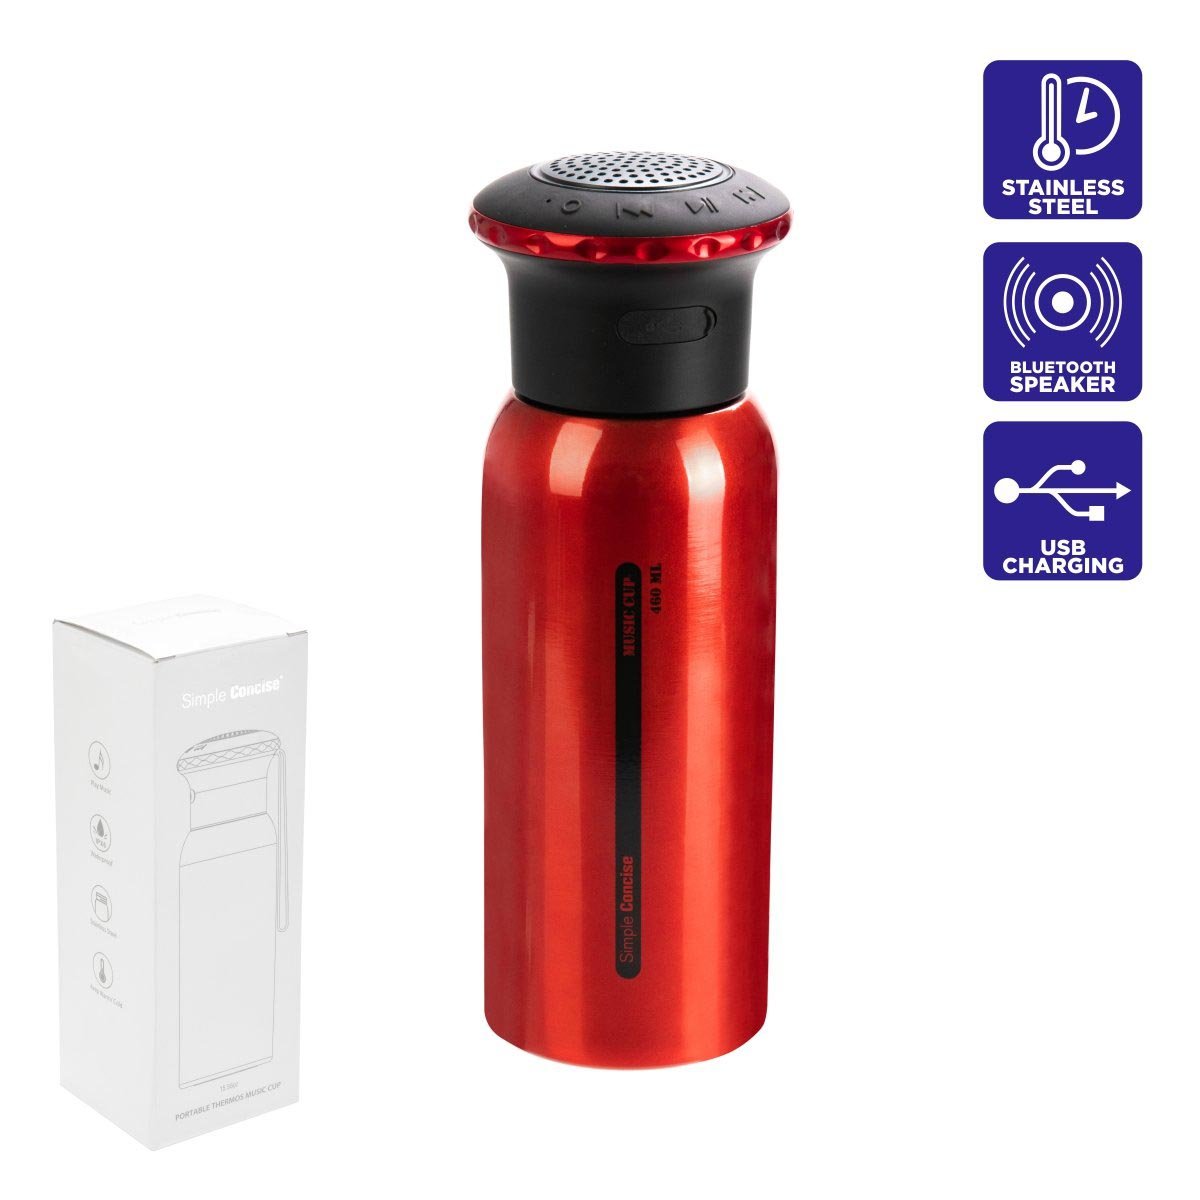 Insulated Water Bottle with Bluetooth Speaker, Red, 15 oz is made of stainless steel and equipped with a USB charger